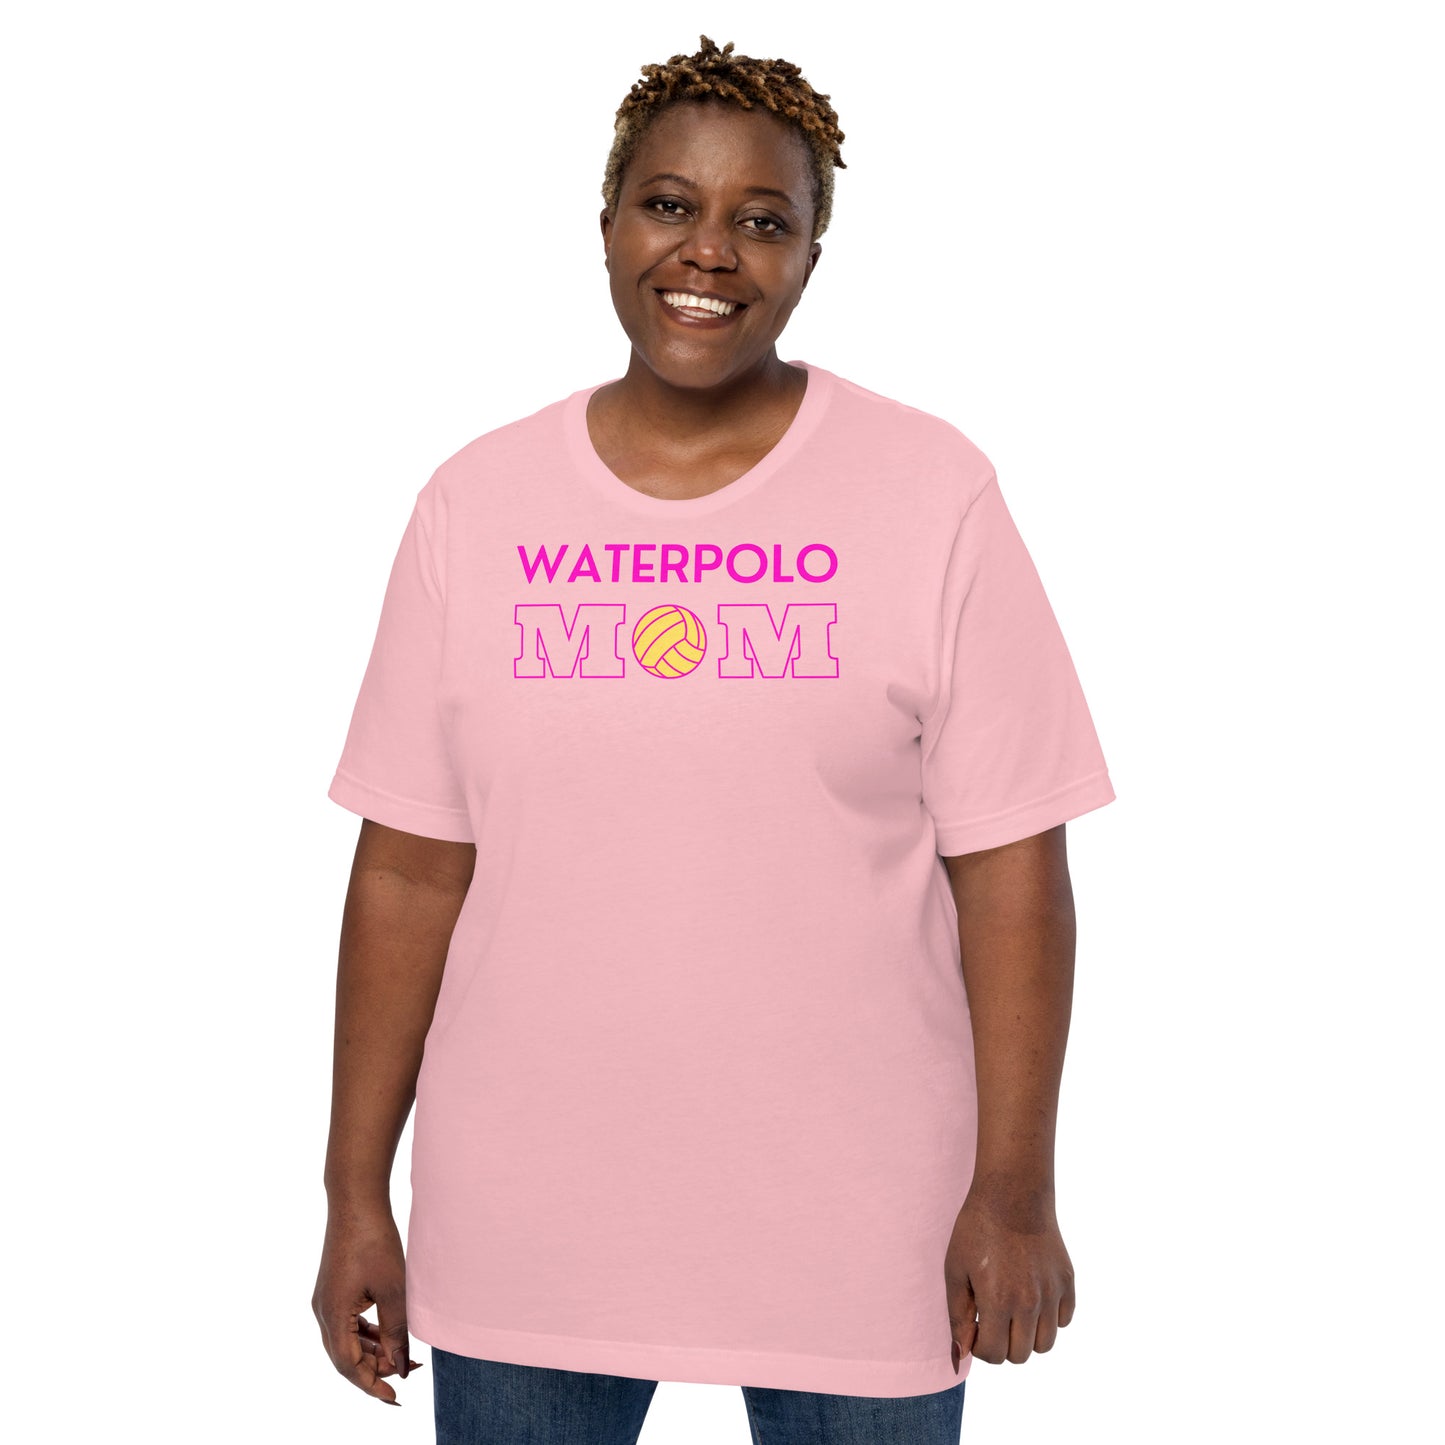 Waterpolo Mom - Pink Lettering - Unisex Soft T-shirt - Bella Canvas 3001